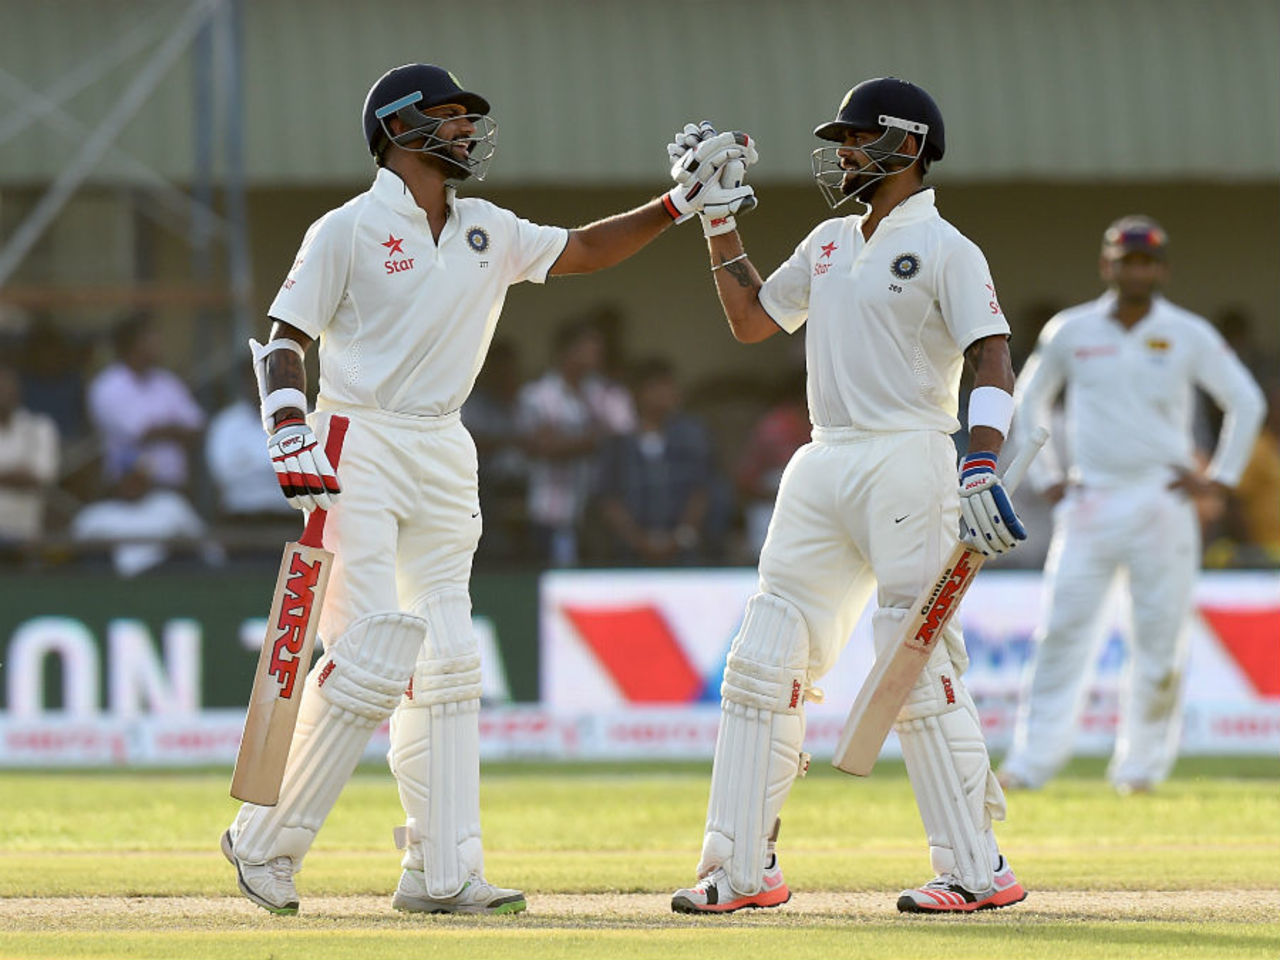 Shikhar Dhawan is congratulated after getting to his fifty, Sri Lanka v India, 1st Test, Galle, 1st day, August 12, 2015